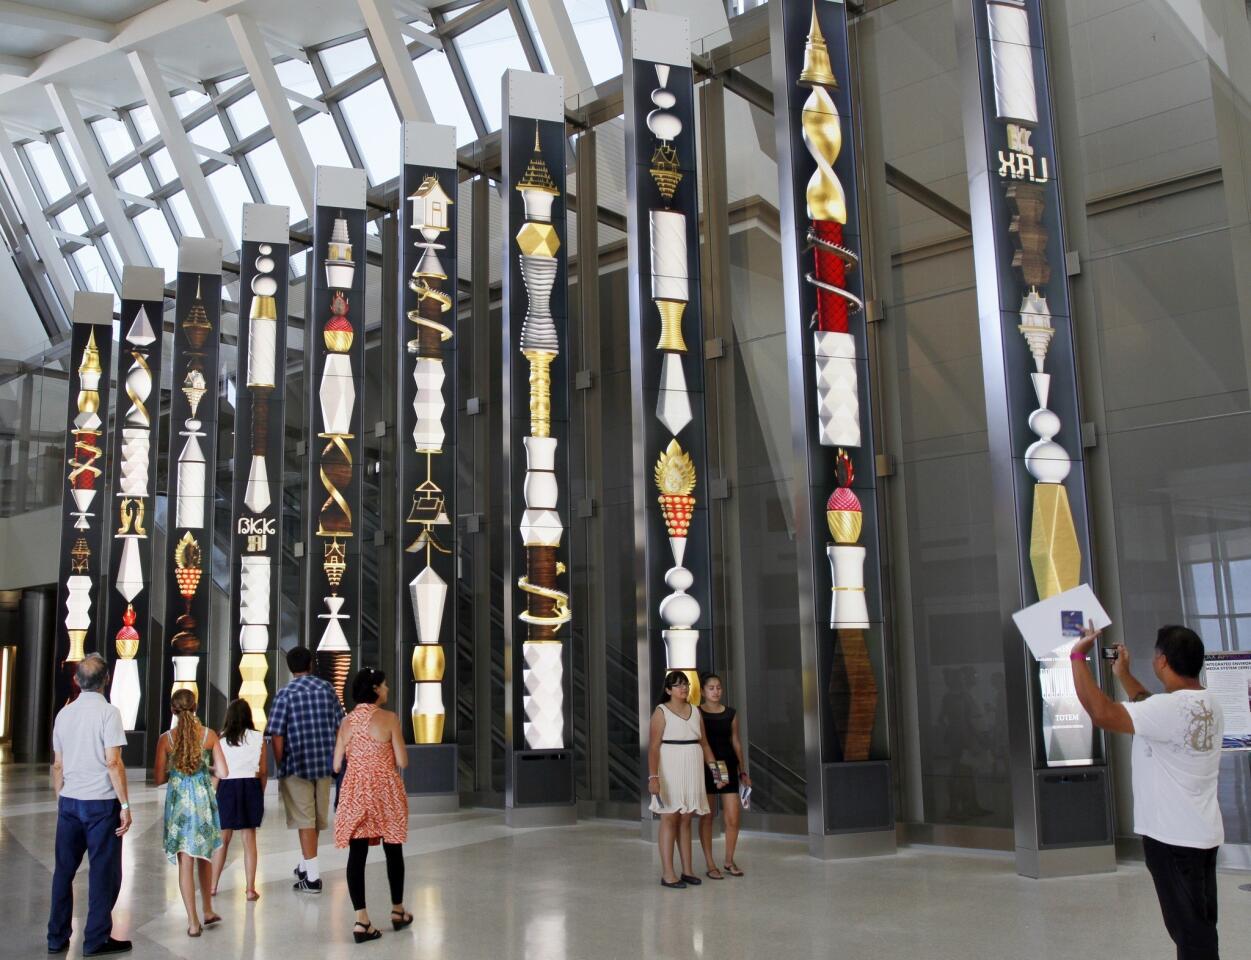 In the north concourse, 28-foot-tall columns of stacked LCD monitors display changing colorful artwork.